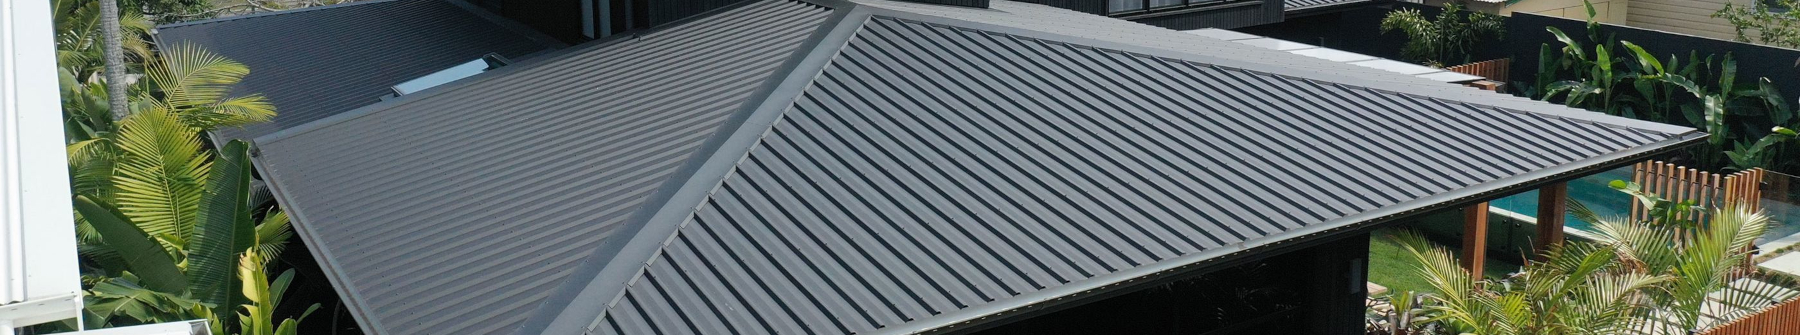 RoofStarPro Roof and Cladding Screws